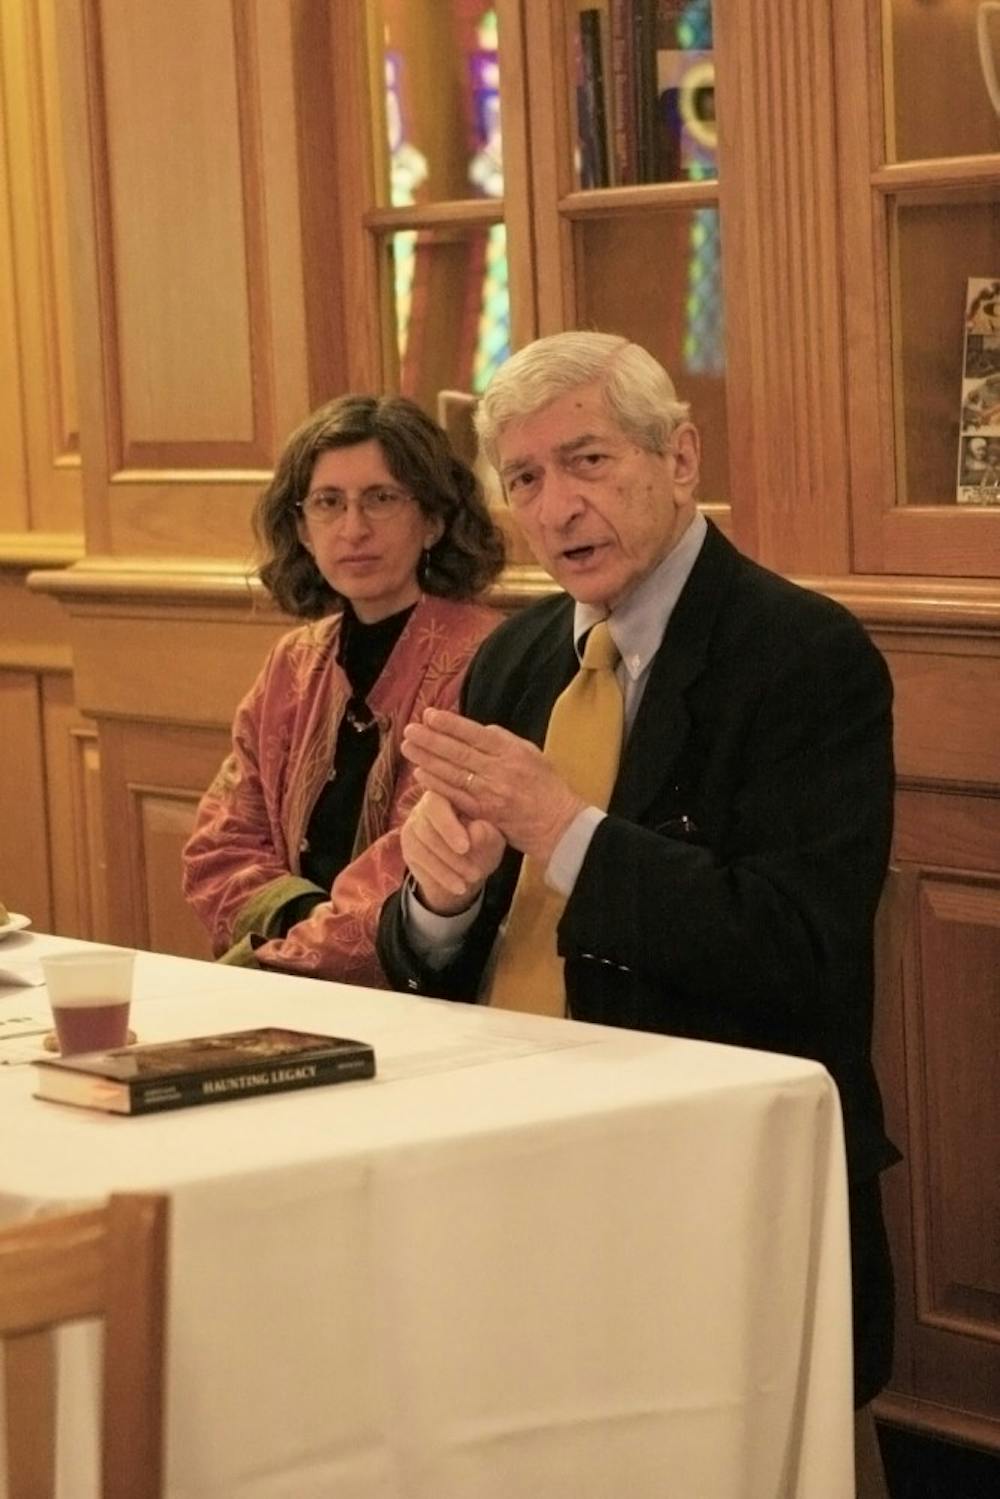 Marvin Kalb was a correspondent for The CBS Evening News for 30 years.